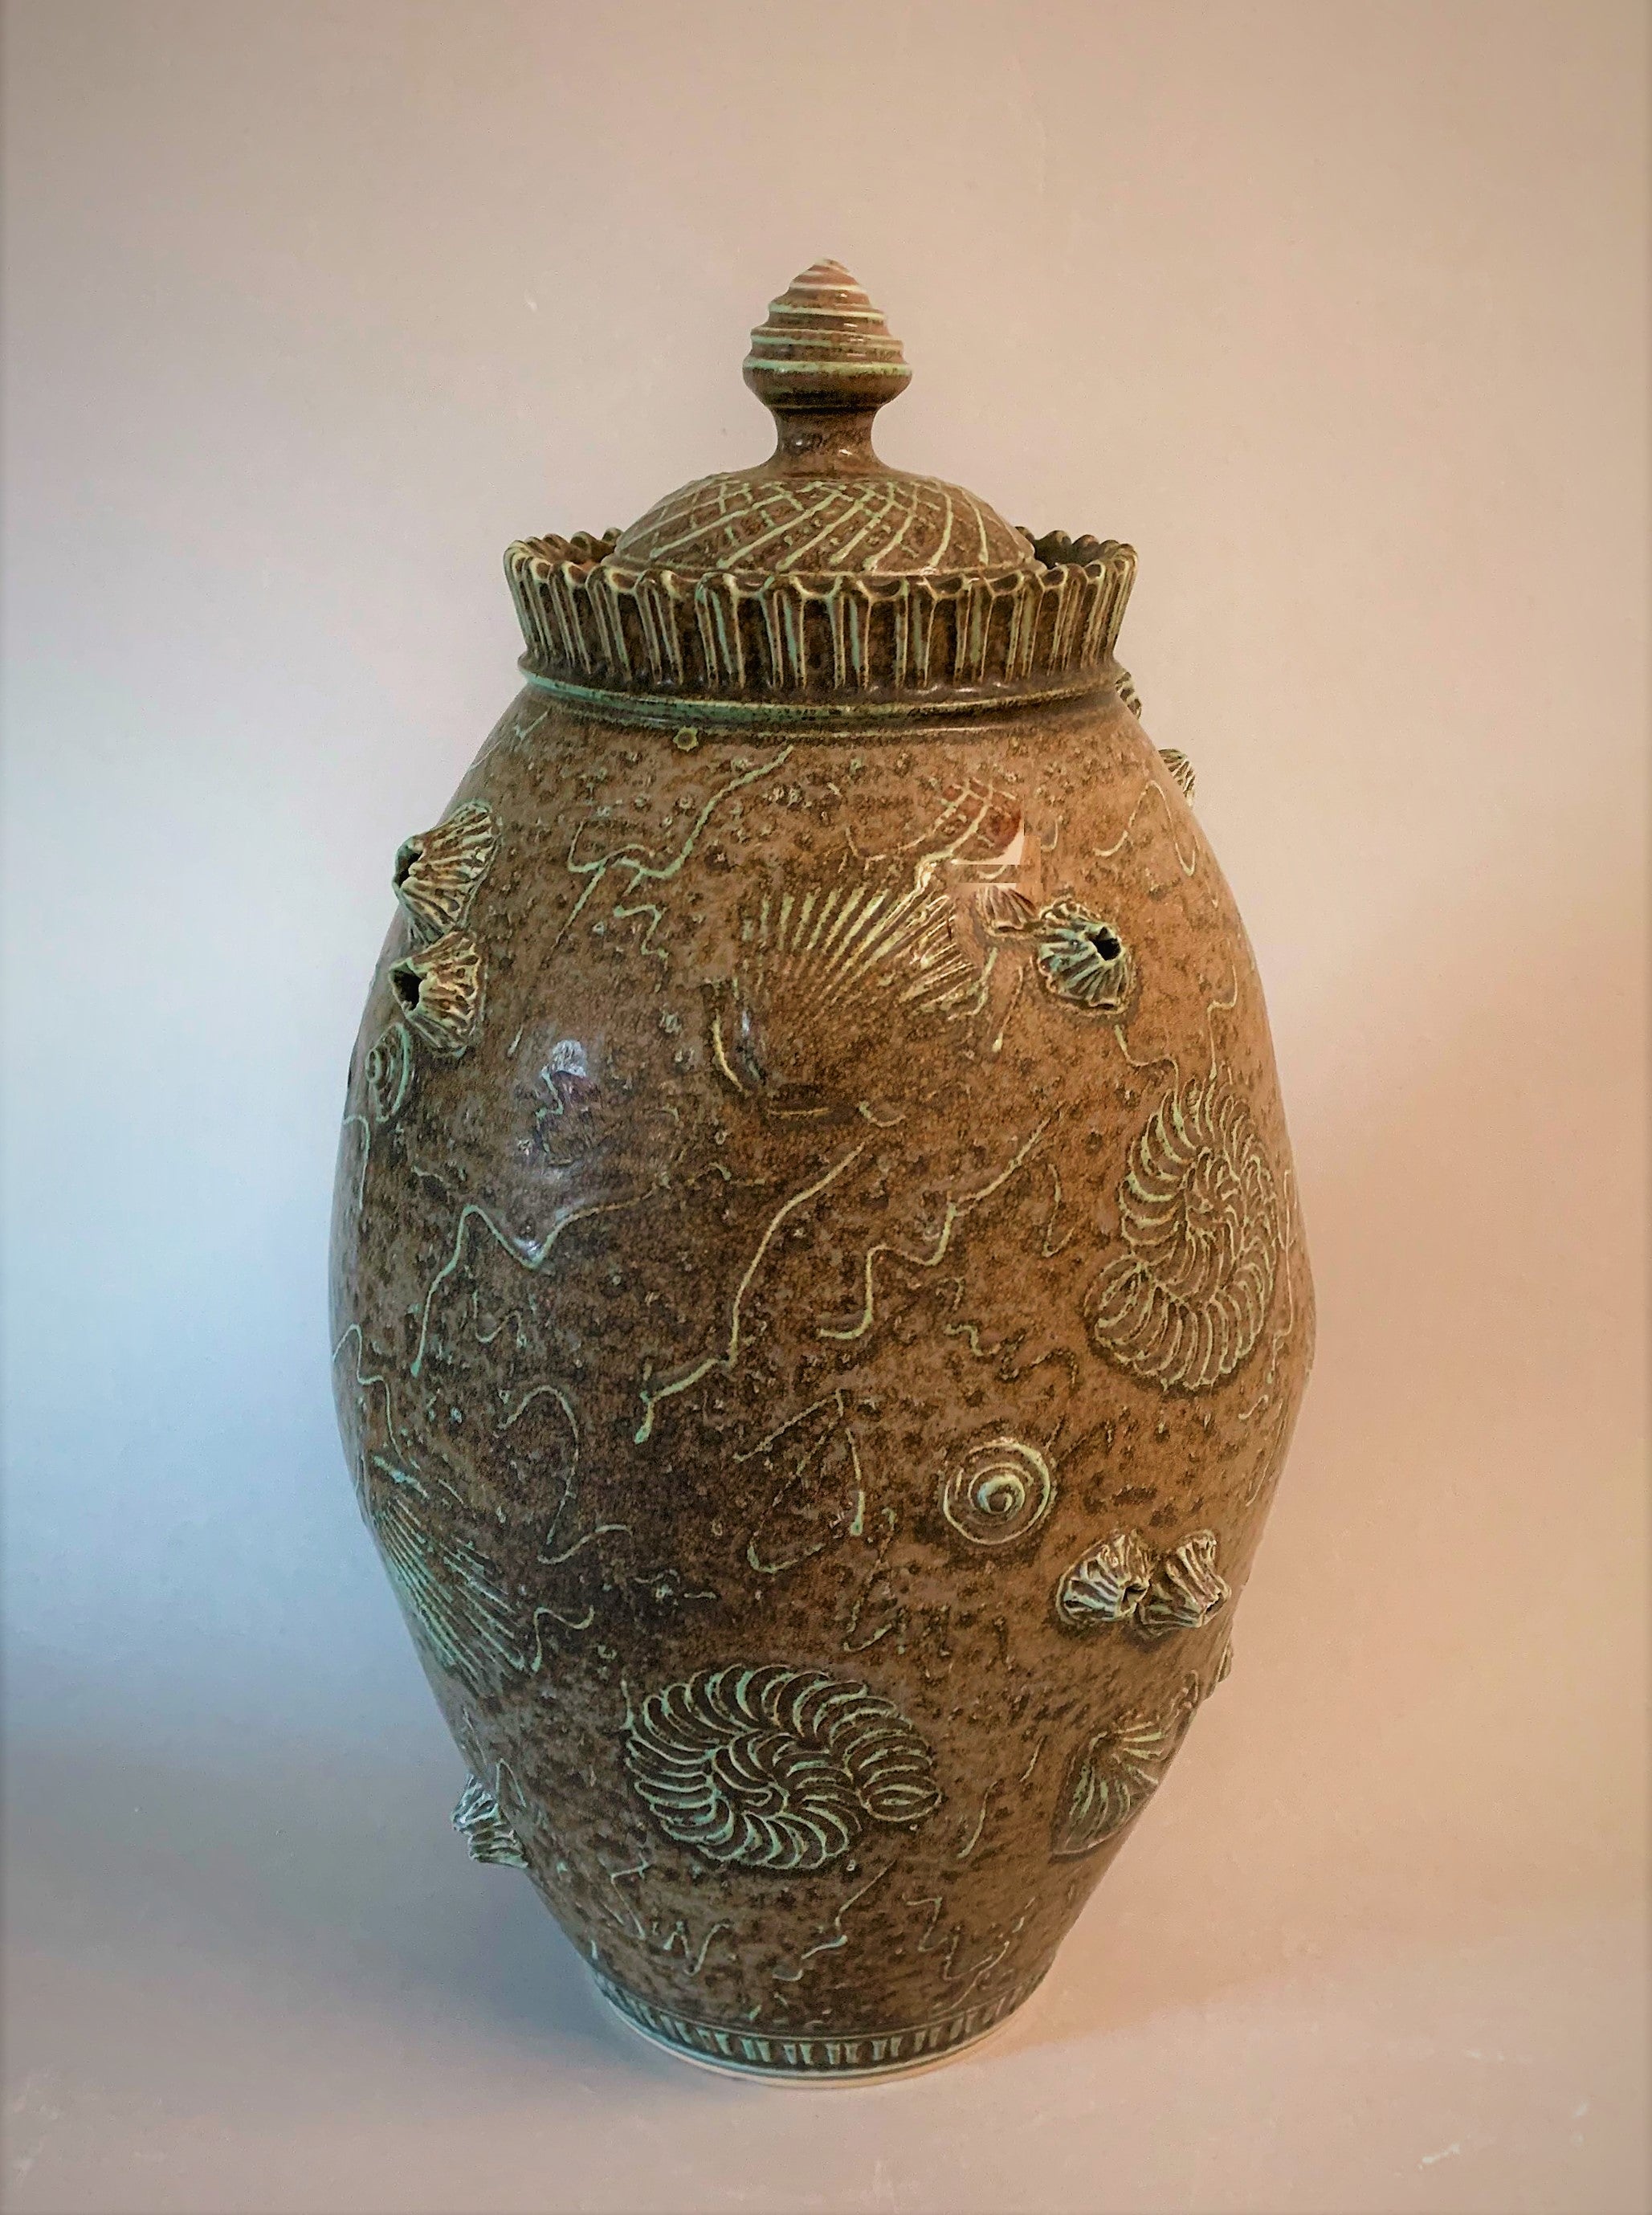 Russell Turnage - Fossil Covered Jar – Bay School Community Arts Center